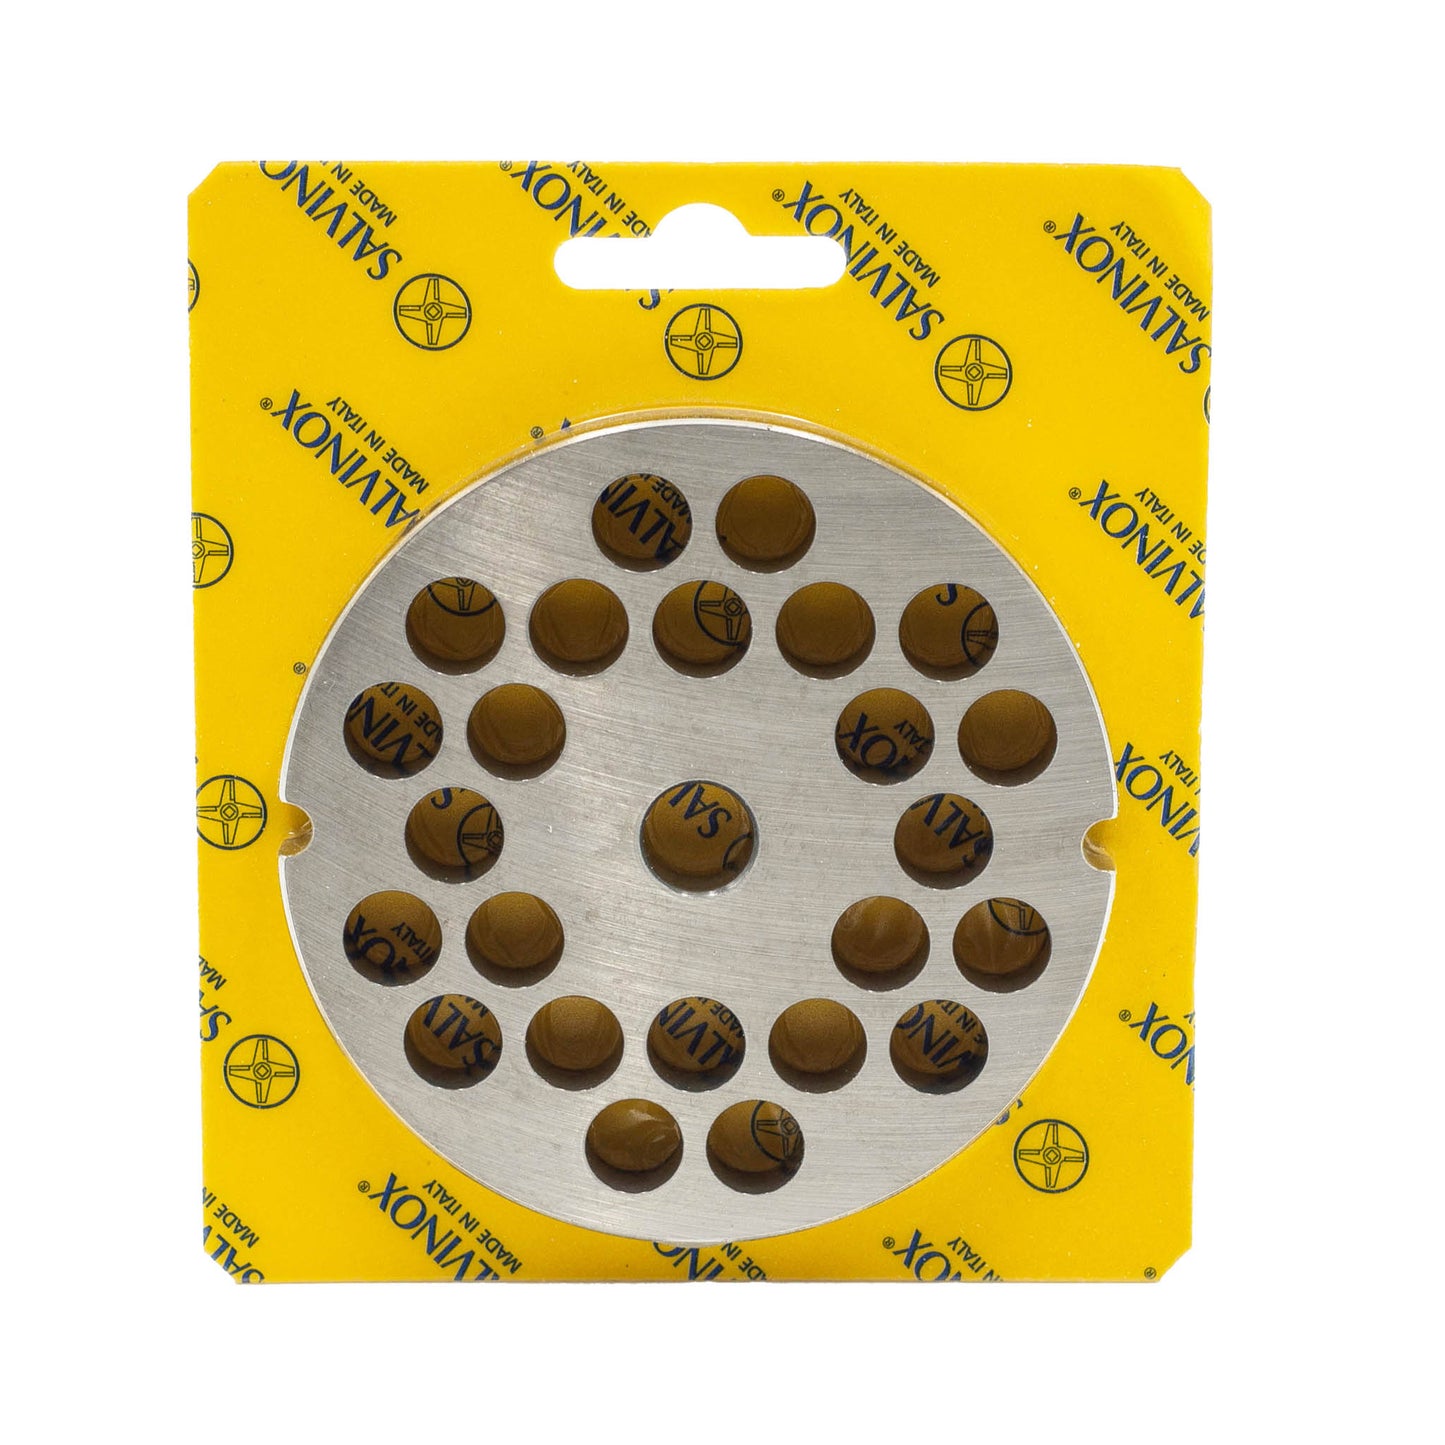 Size 32 with 12mm holes stainless steel replacement mincer plate for salami and sausage mincing machines. 